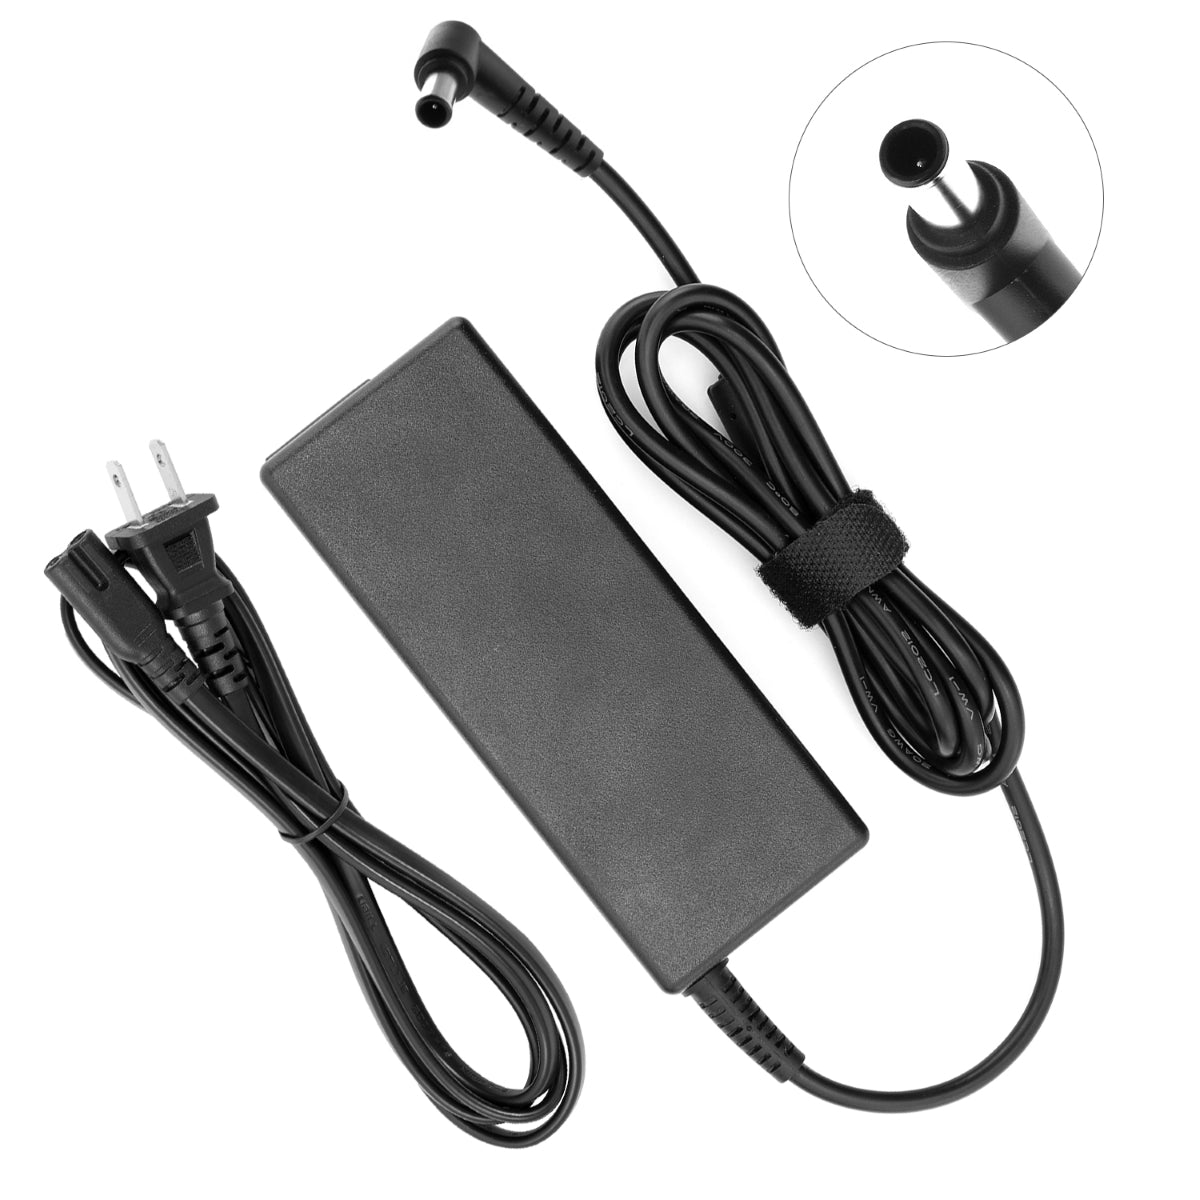 Compatible Charger for Sony Vaio VGN-FZ